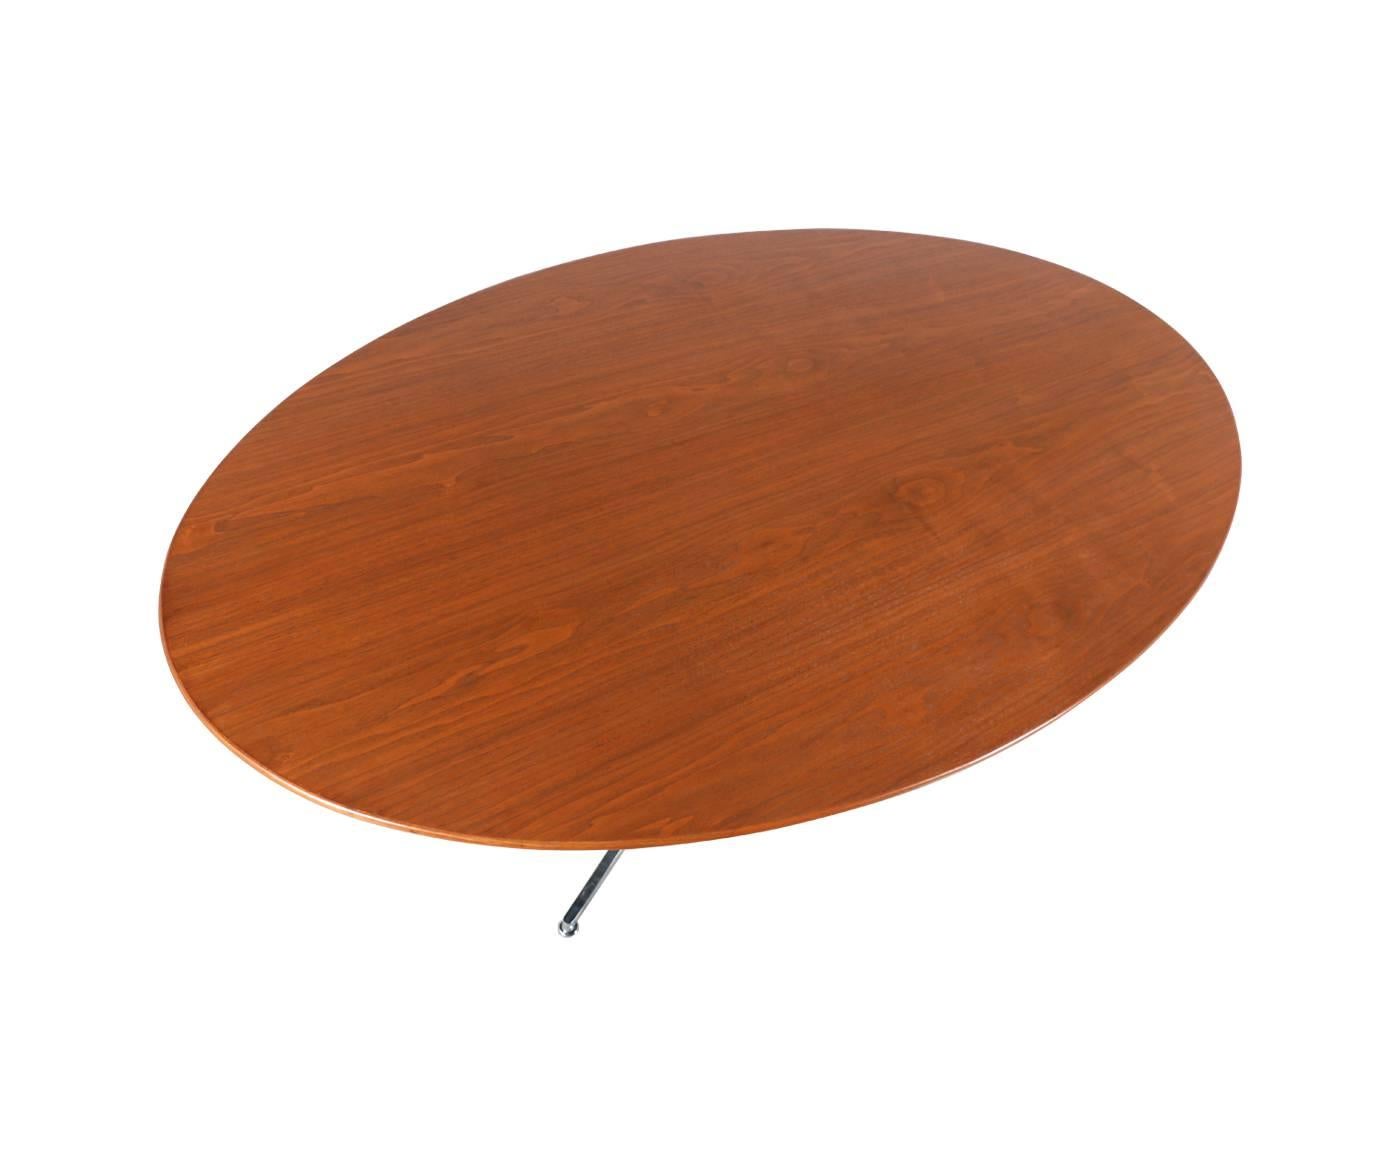 Mid-20th Century Florence Knoll Oval Walnut Dining Table with Chrome Base